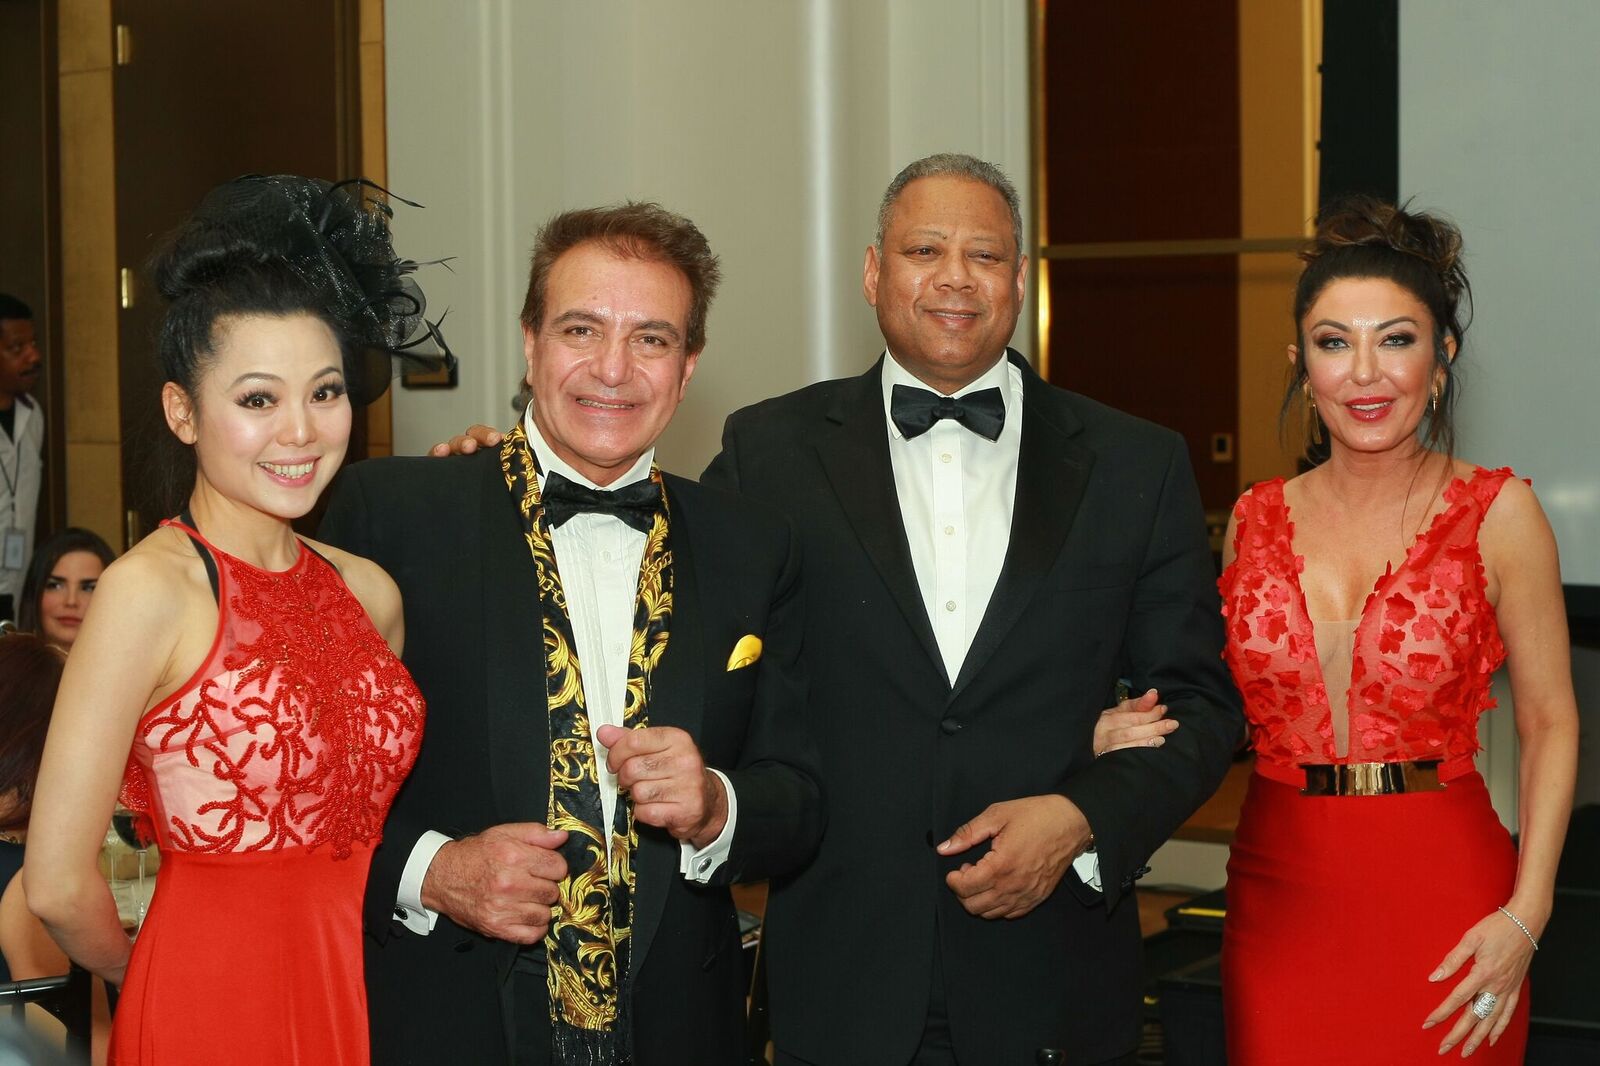 Angelina Leo, COO of Wardour Studio, Steven Nia, Chairman & CEO of Wardour Studio, The Hon. Walton Brown Jr., JP MP, Minister of Home Affairs, The Government of Bermuda, and Ms. Ozlem Fanning